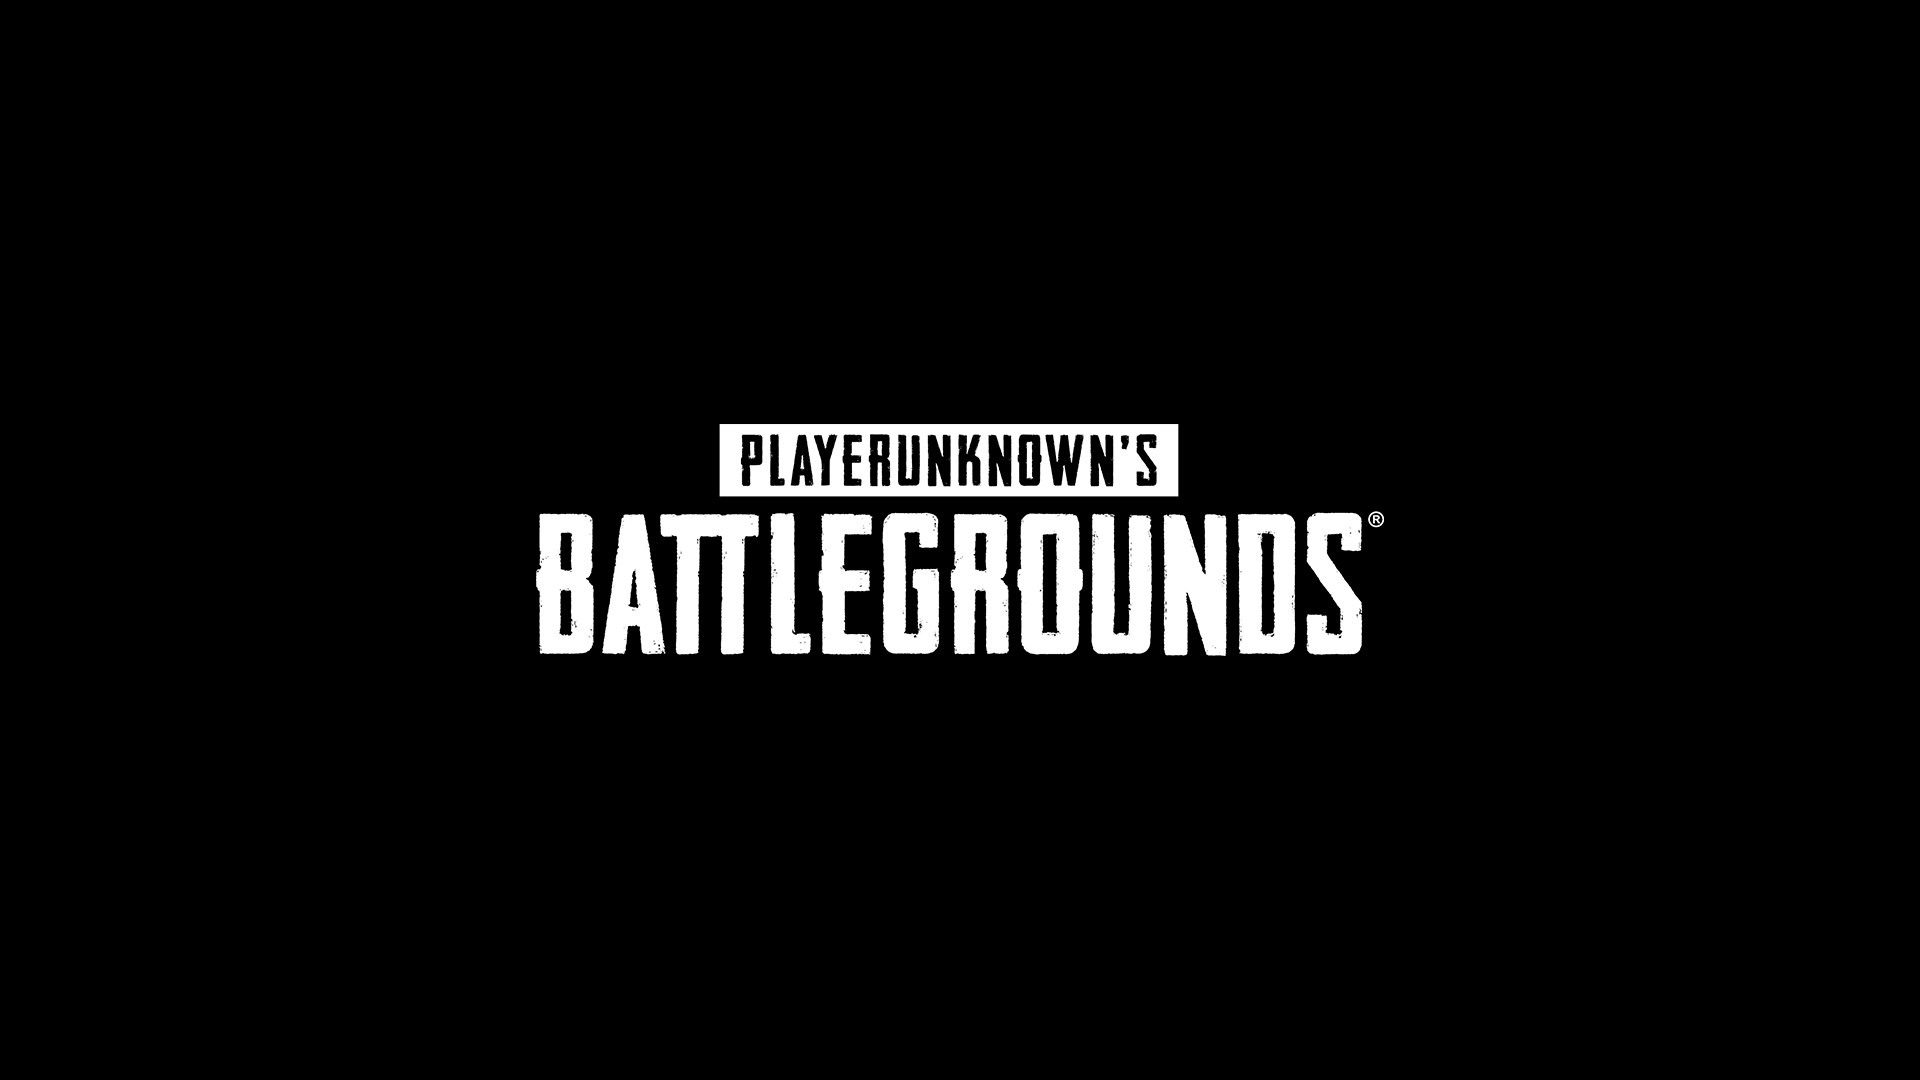 Pubg Europe Console We Ve Been Looking At The Matchmaking Times For Ranked Fpp And We Know That They Re Not Looking Too Great Fpp Players This Weekend We Want To Get You